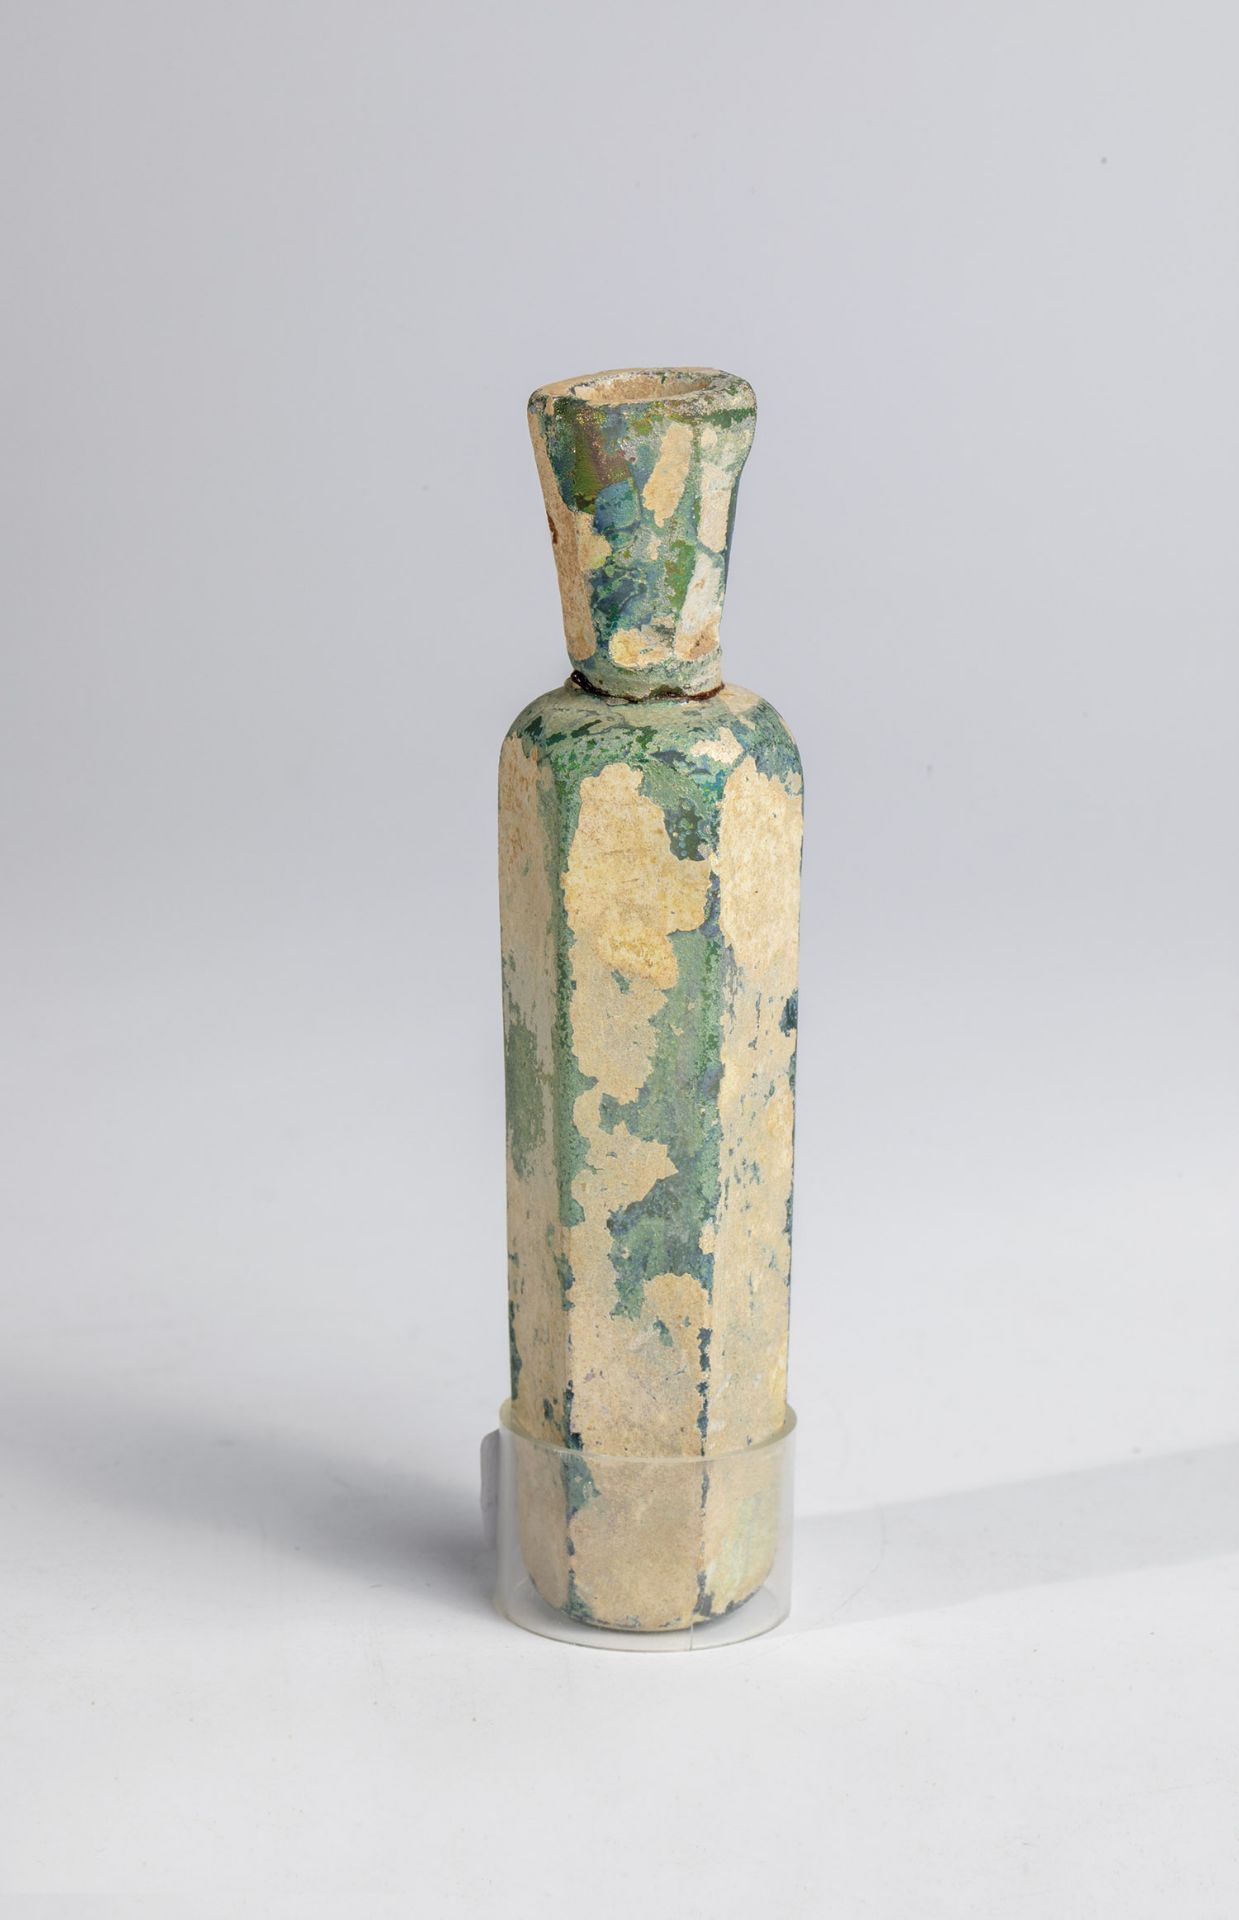 Small balsamarium probably Middle East, 9th century A.D. Greenish glass. Six-sided, slim body with